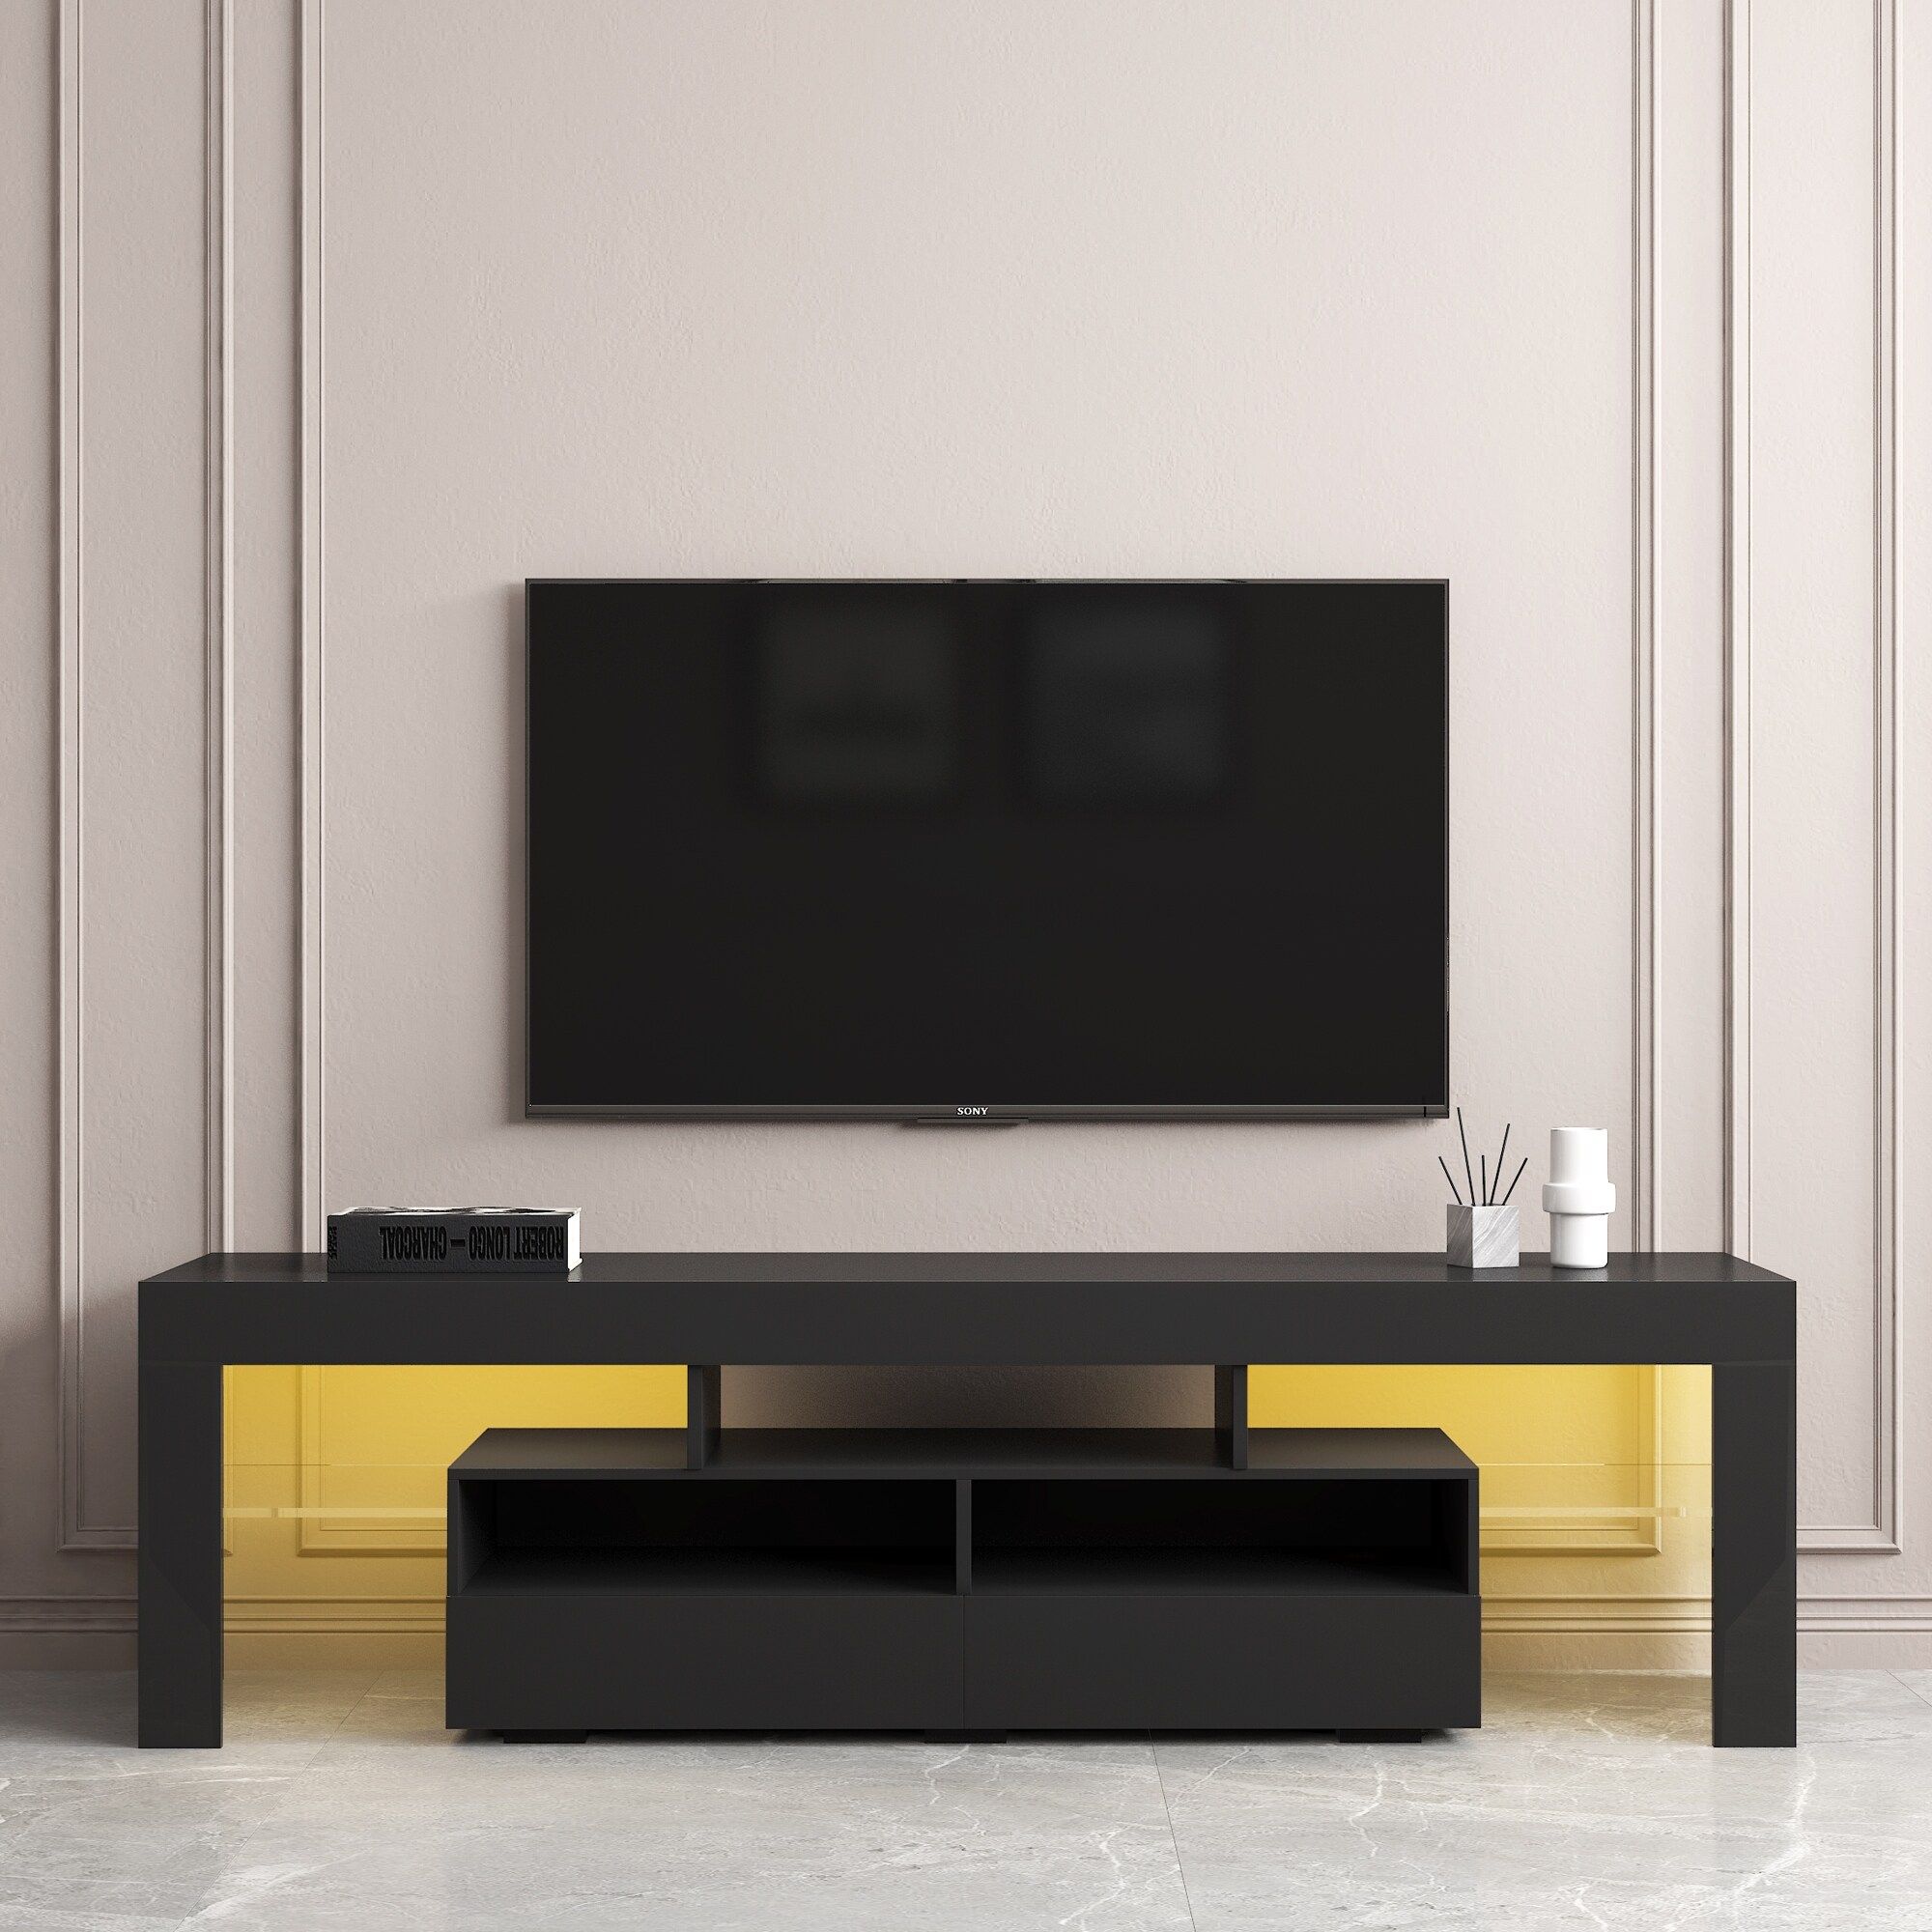 Modern Tv Stand With 2 Drawers, 2 Open Shelves And Rgb Led Lights – 63"  Black Cabinet For Living Room – Bed Bath & Beyond – 37530008 Within Rgb Entertainment Centers Black (Photo 12 of 15)